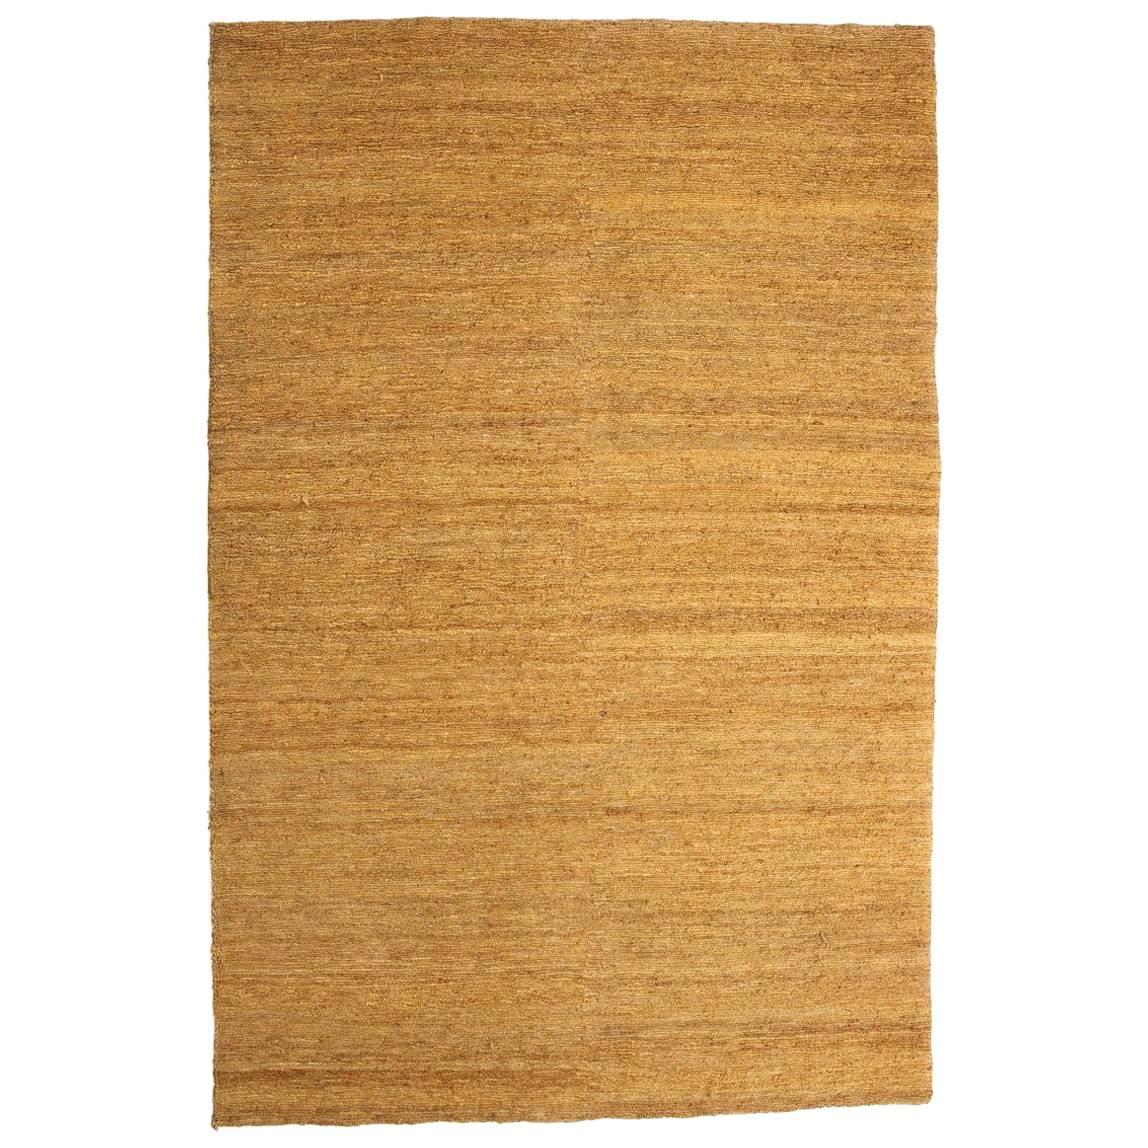 Ochre Earth Rug in Hand-Knotted Jute by Nani Marquina & Ariadna Miquel, Small For Sale